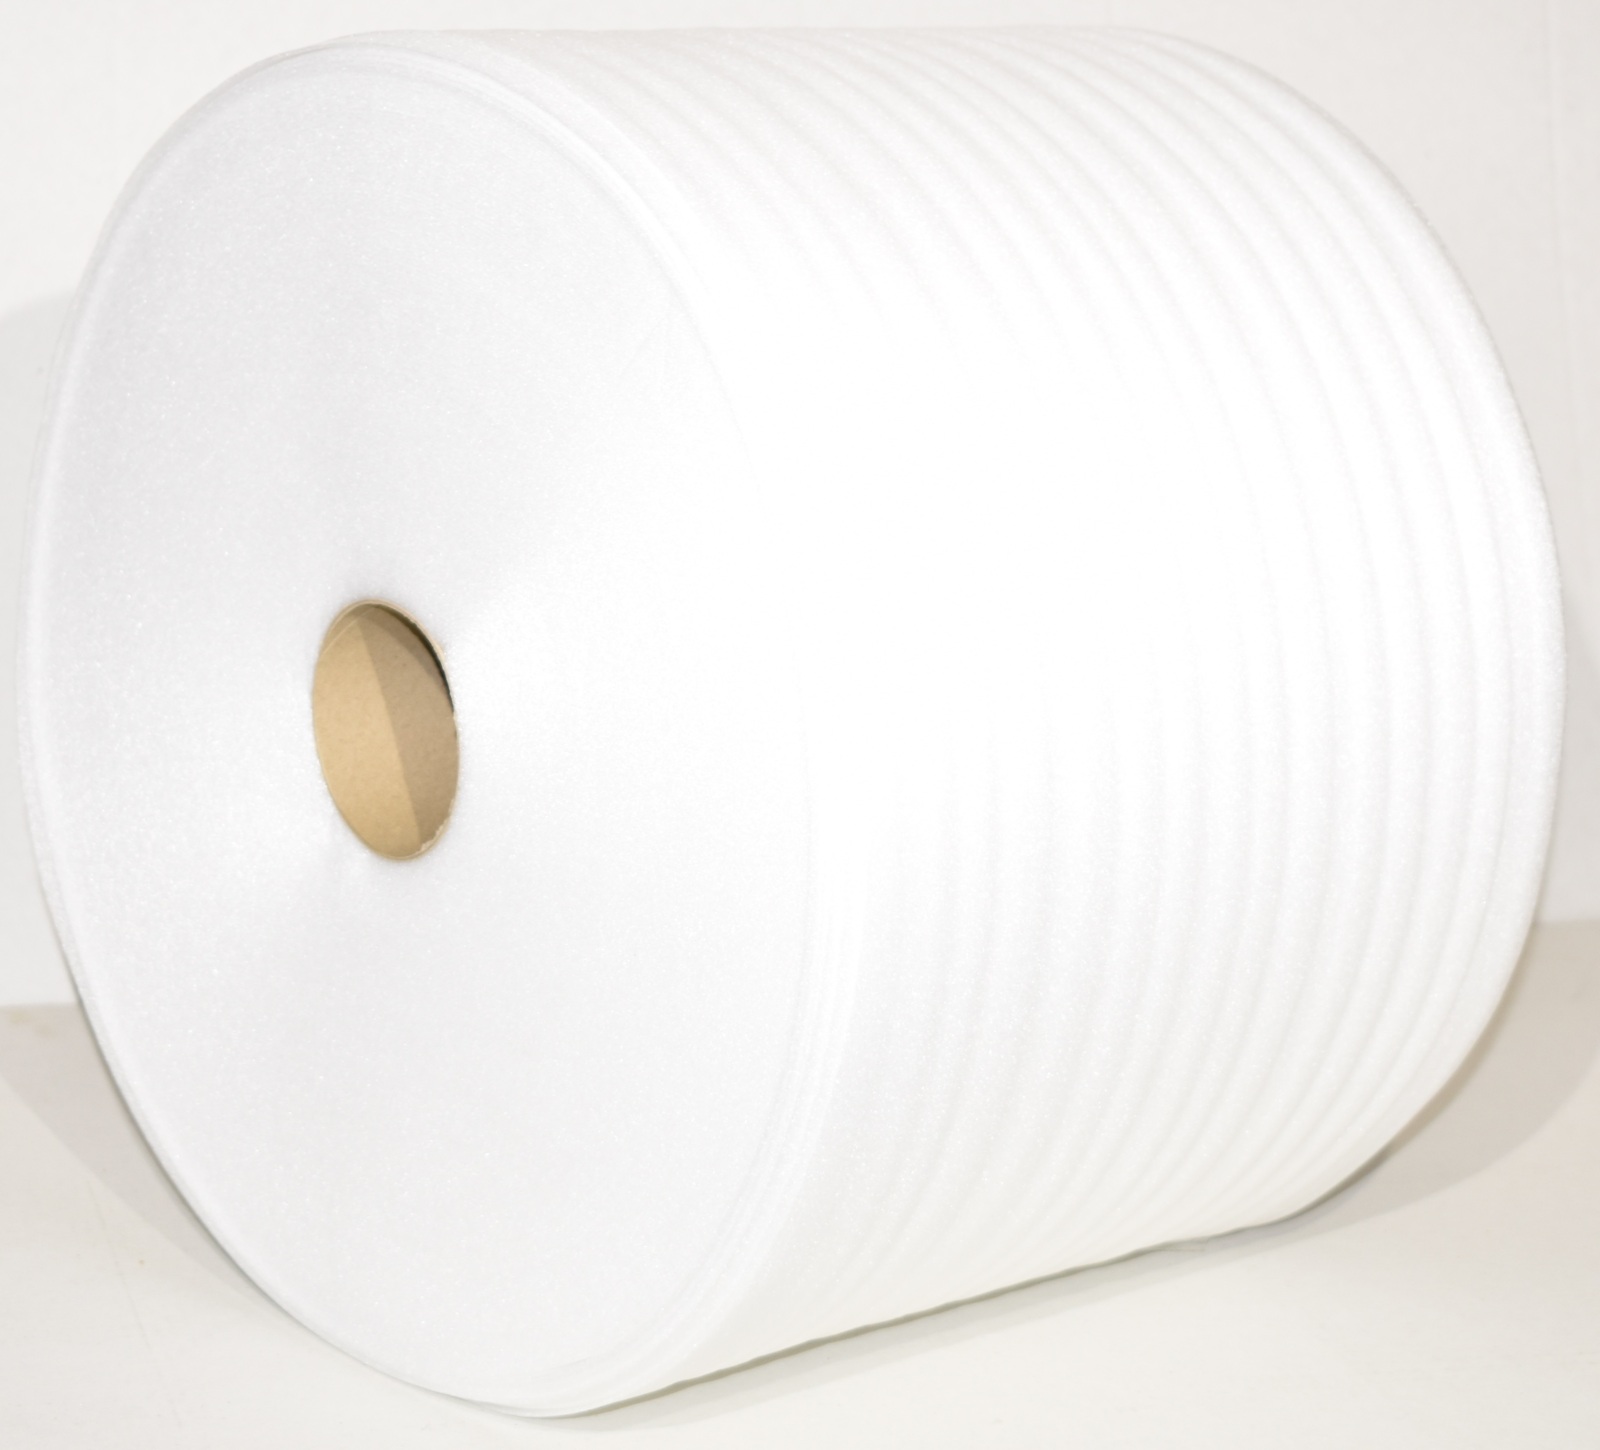 1mm EPE Foam 300mm x 100m (1 Roll) Price Includes Gst